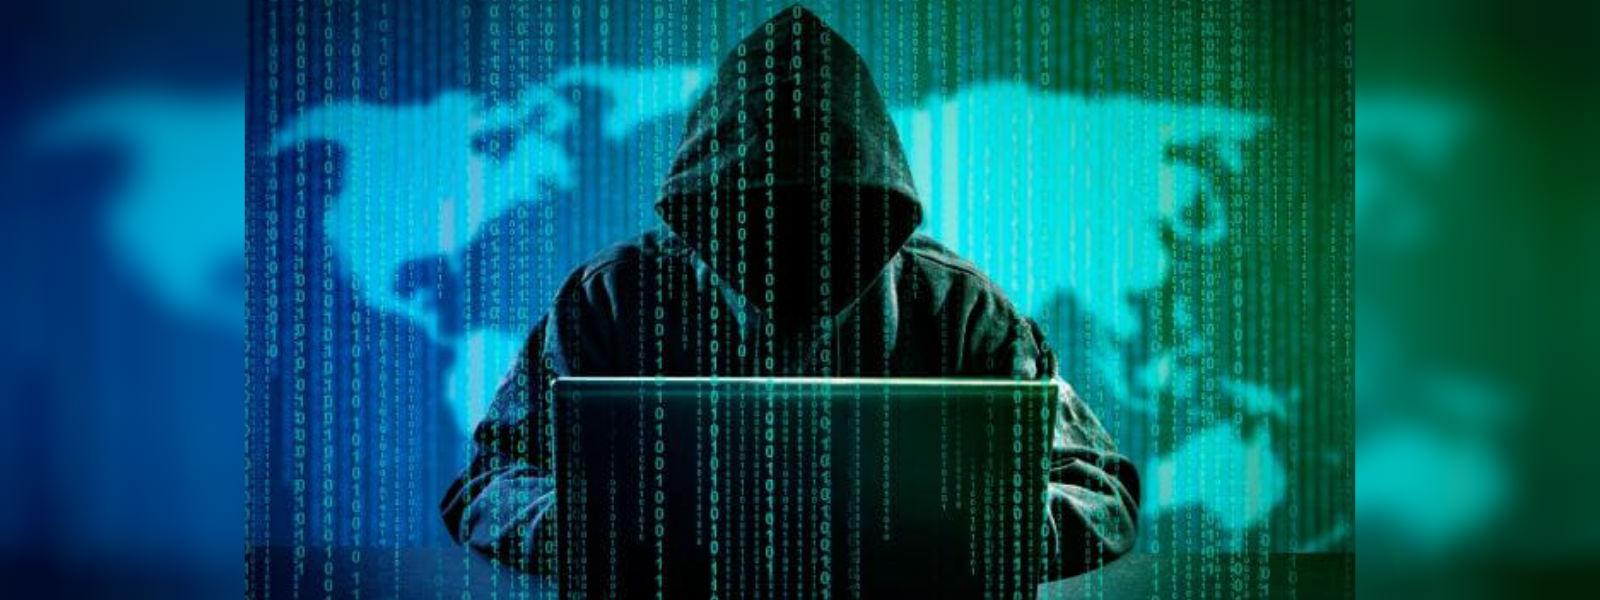 Cyber attack : 2 groups of foreign hackers